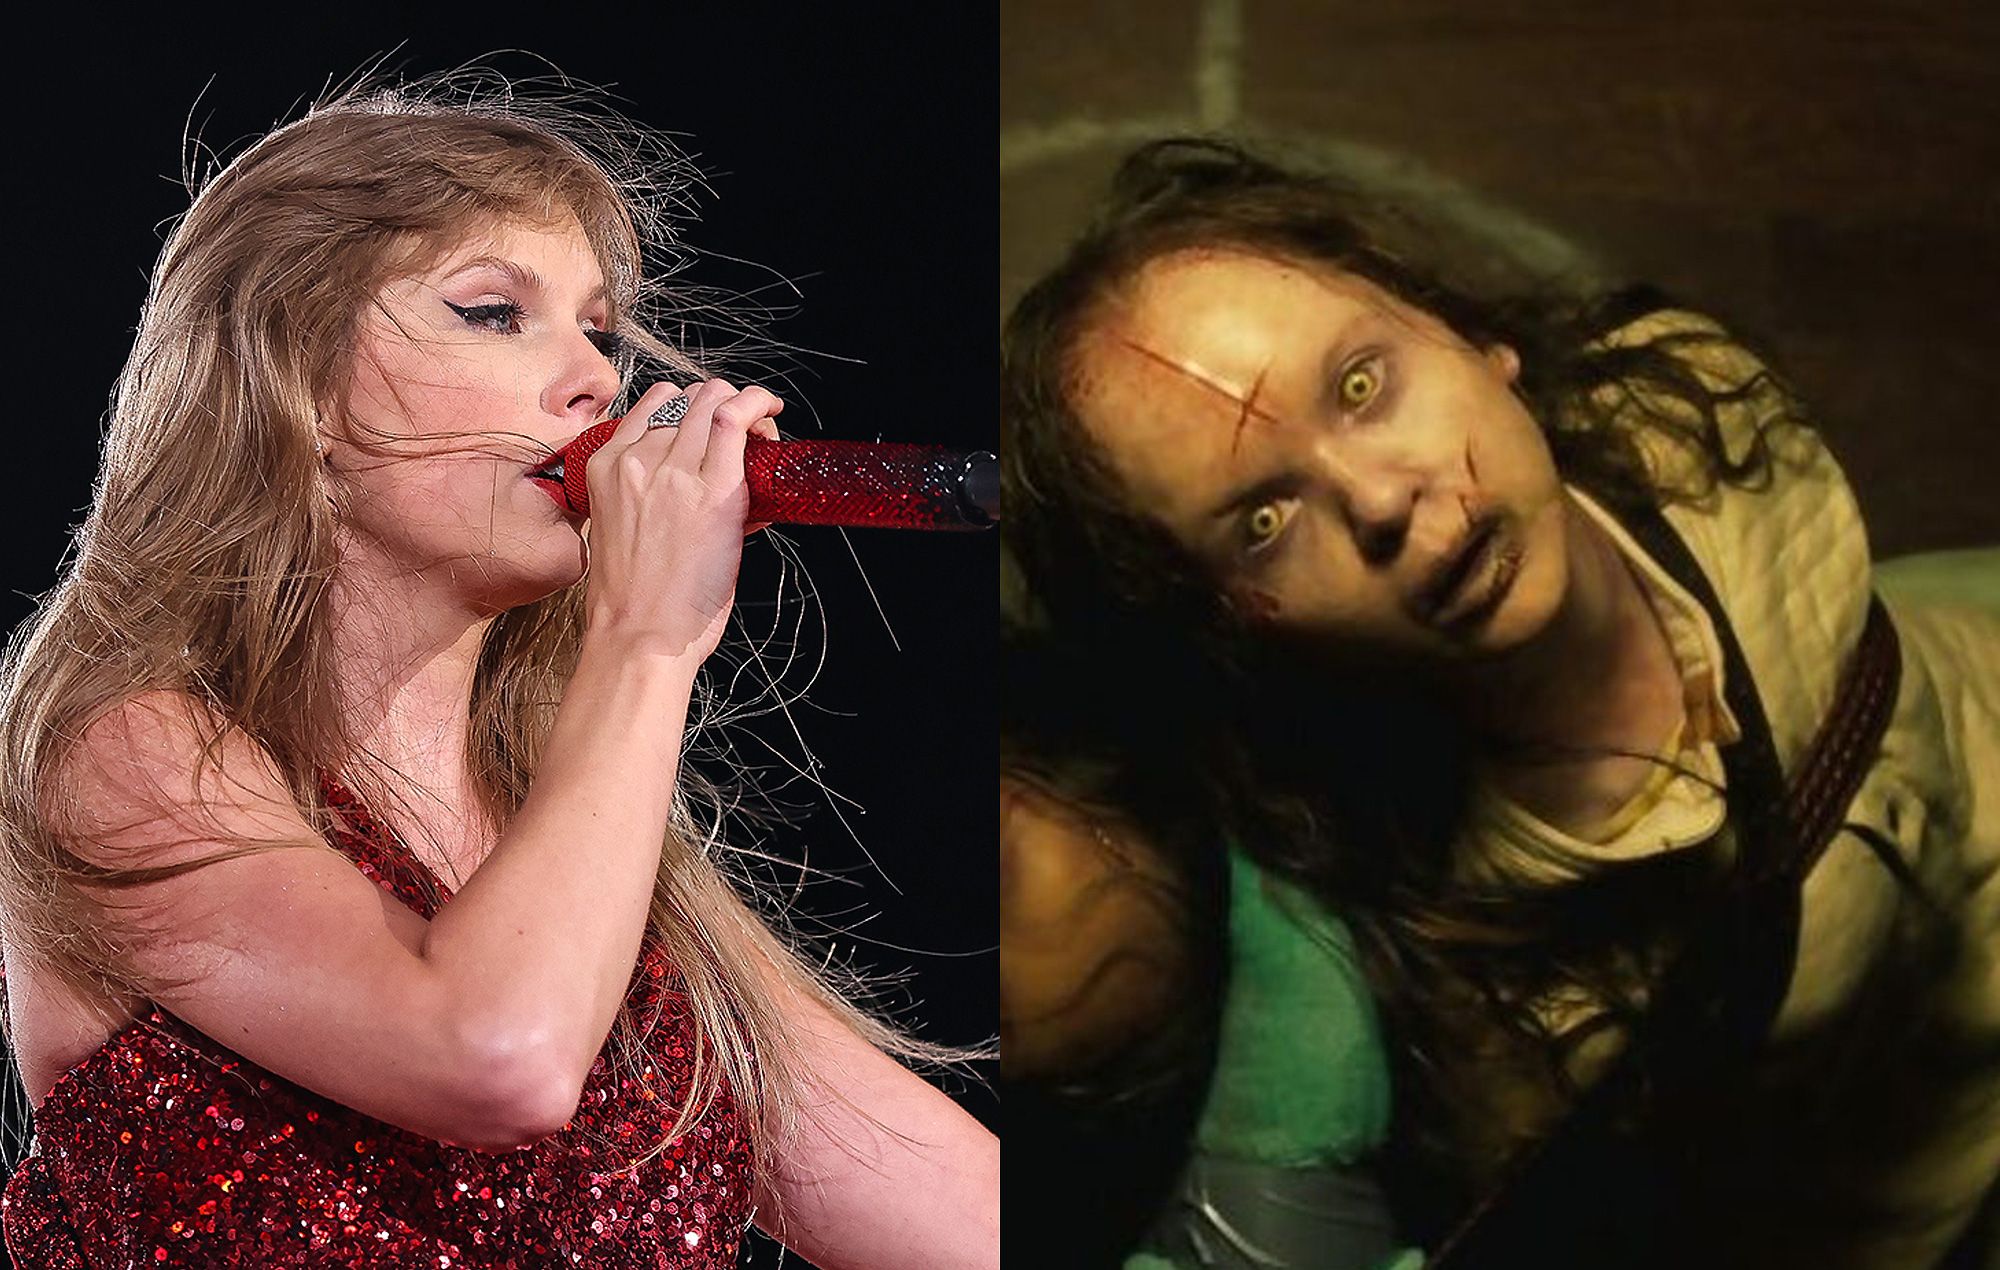 Taylor Swift in a composite image with a character from 'The Exorcist: Believer'